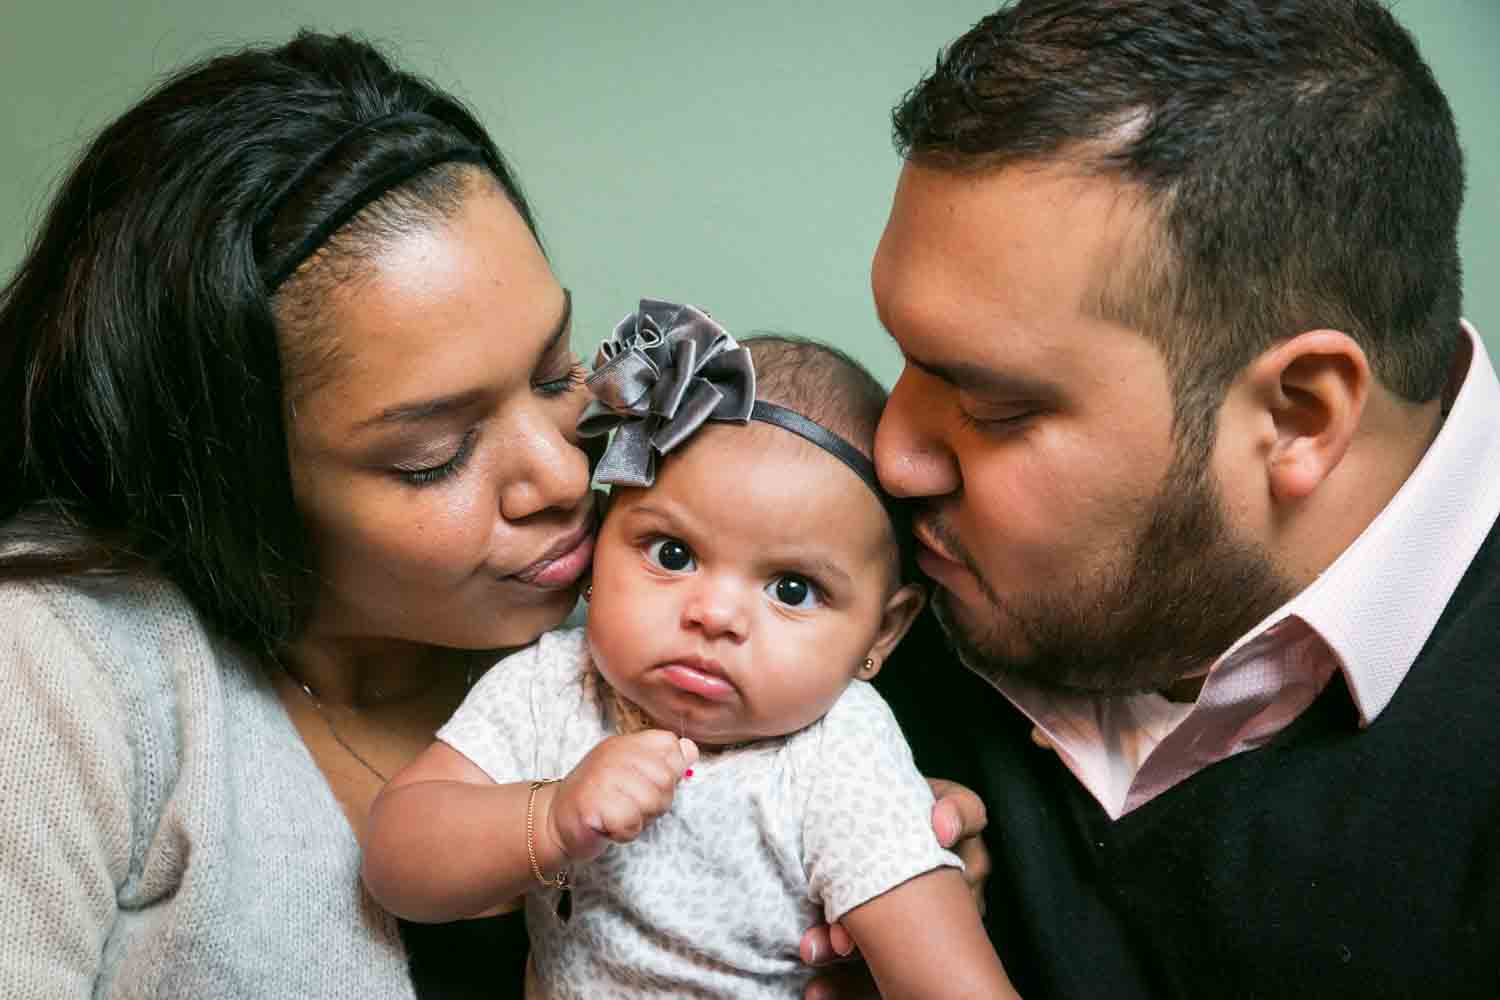 Prospect Park family portrait of parents kissing angry baby on both cheeks